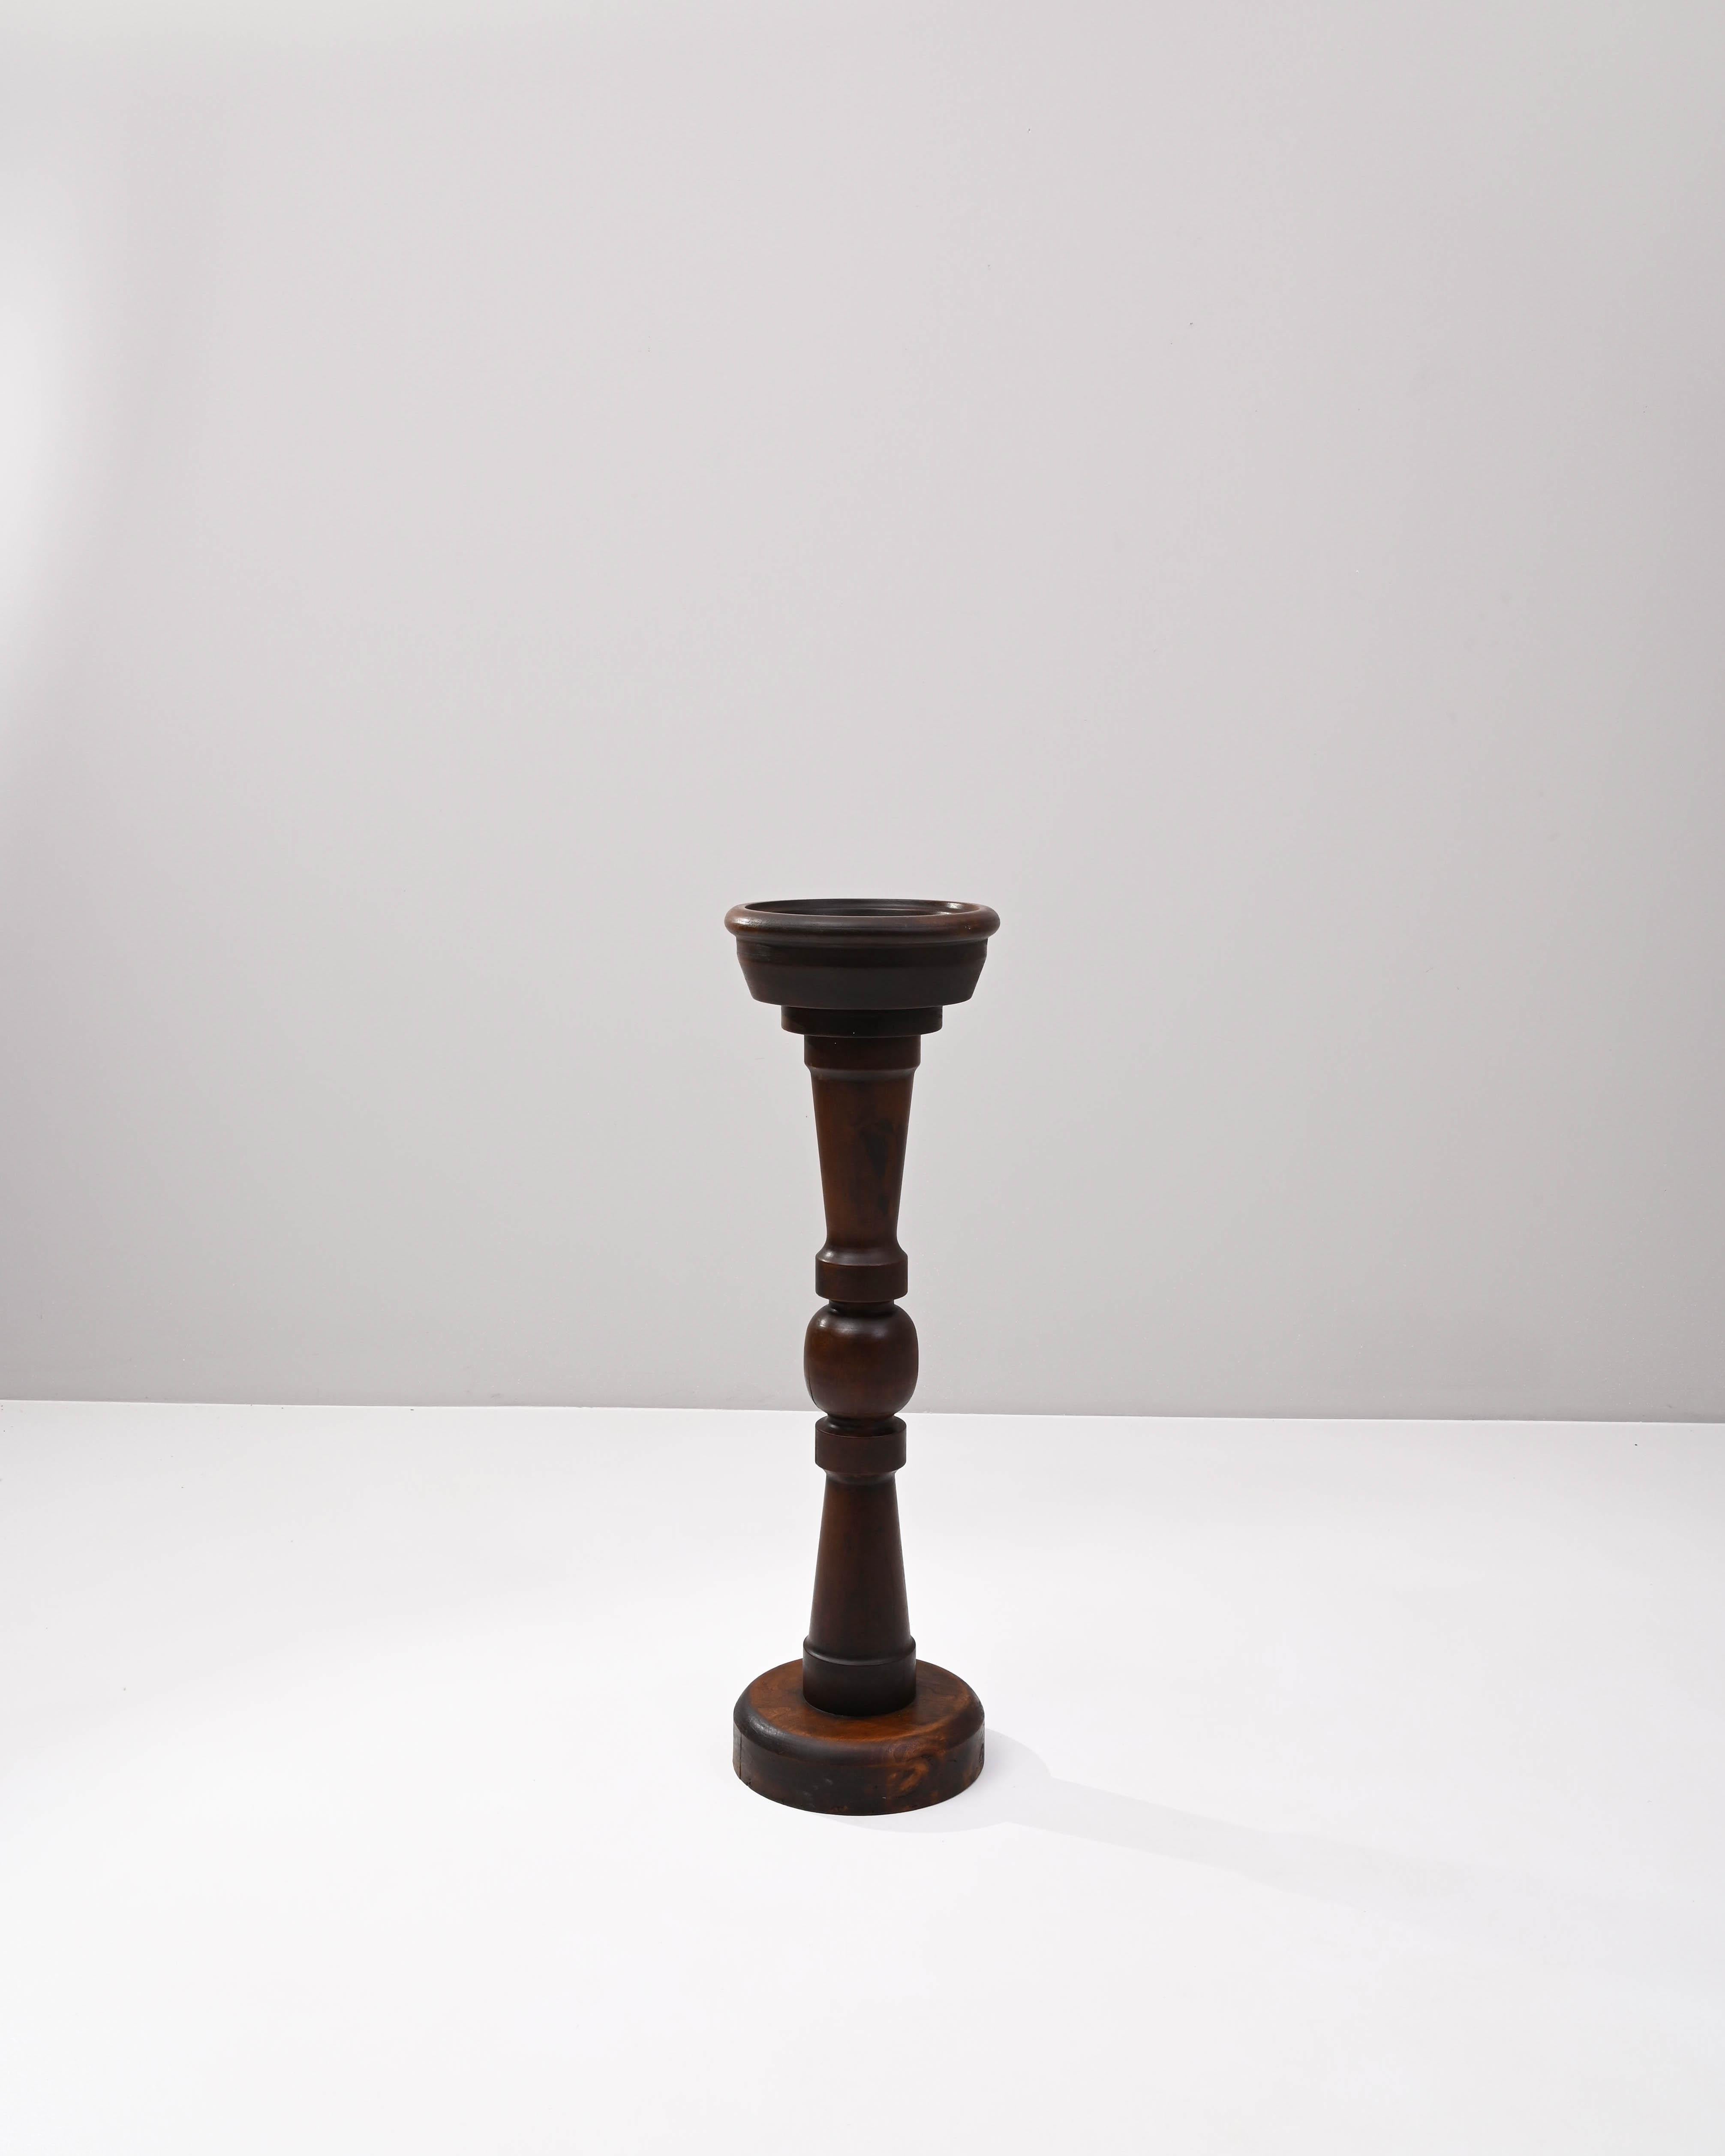 Lathed and polished mahogany, this elegant wooden post hails from early 20th Century France. A vide-poche or other repository, the pedestal base supports an integrated wooden bowl – certainly purpose built– once used as a vessel for a convenient